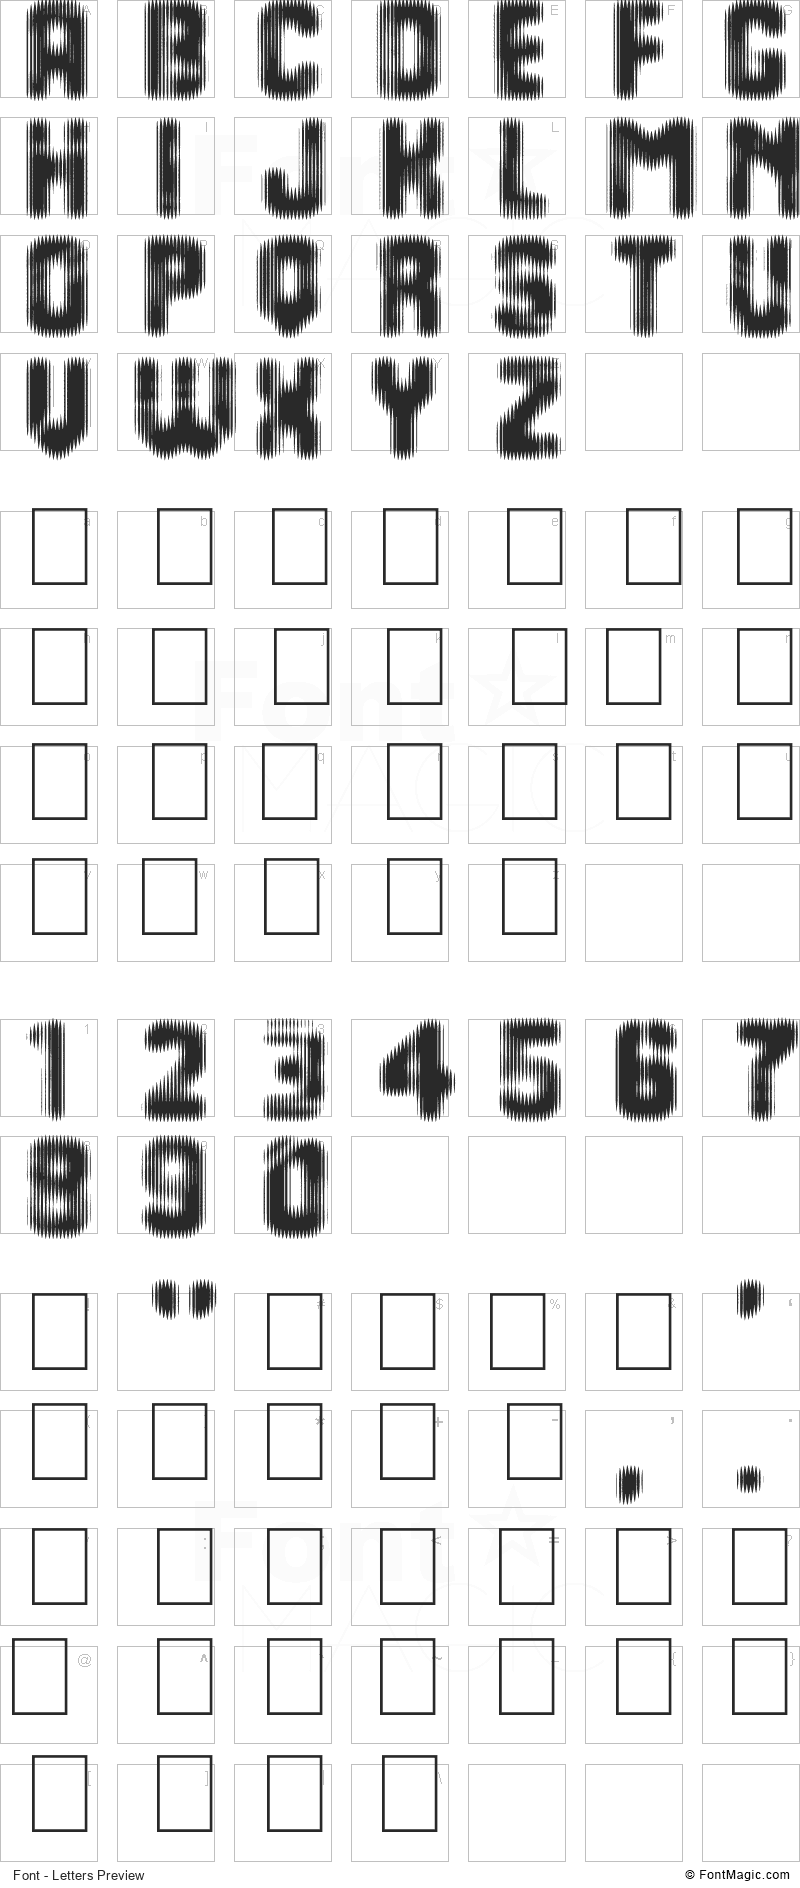 Last Day On Earth Font - All Latters Preview Chart